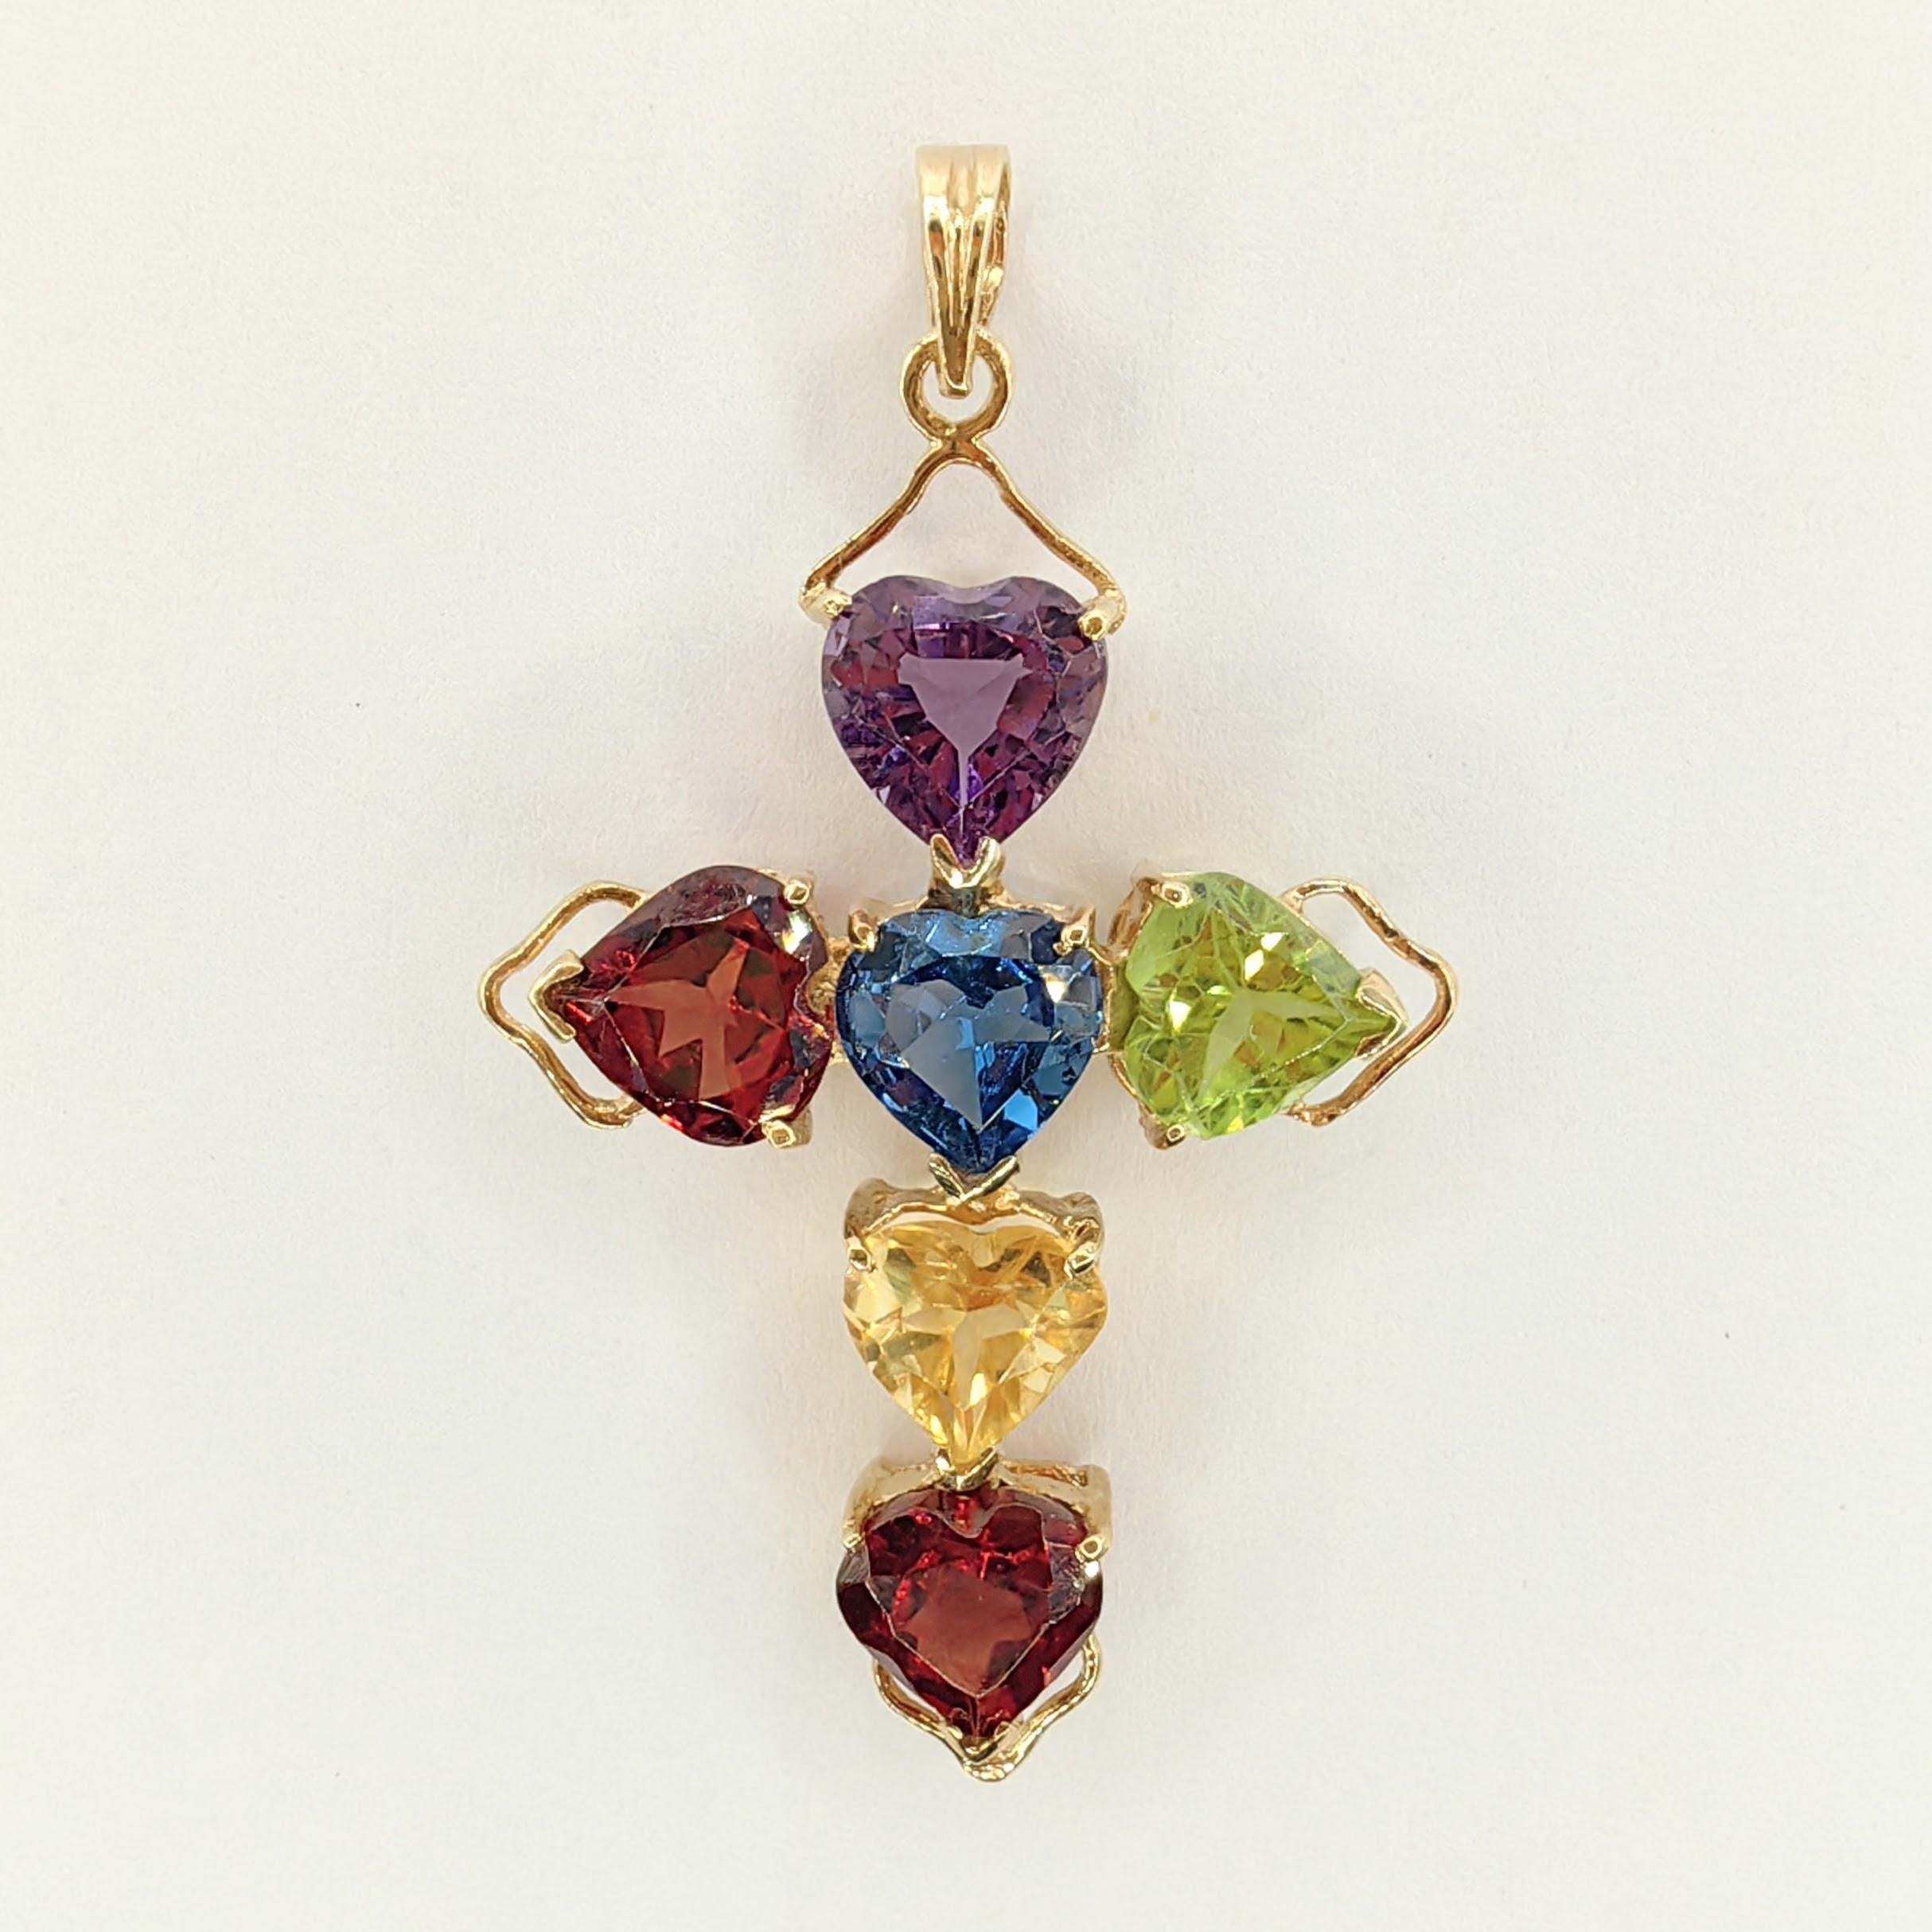 Introducing our Vintage Heart Cut Mixed Stones Cross Necklace Pendant in 14K Yellow Gold, a timeless piece of jewelry that exudes simple vintage charm while celebrating the elegance and individual significance of each gemstone.

This pendant